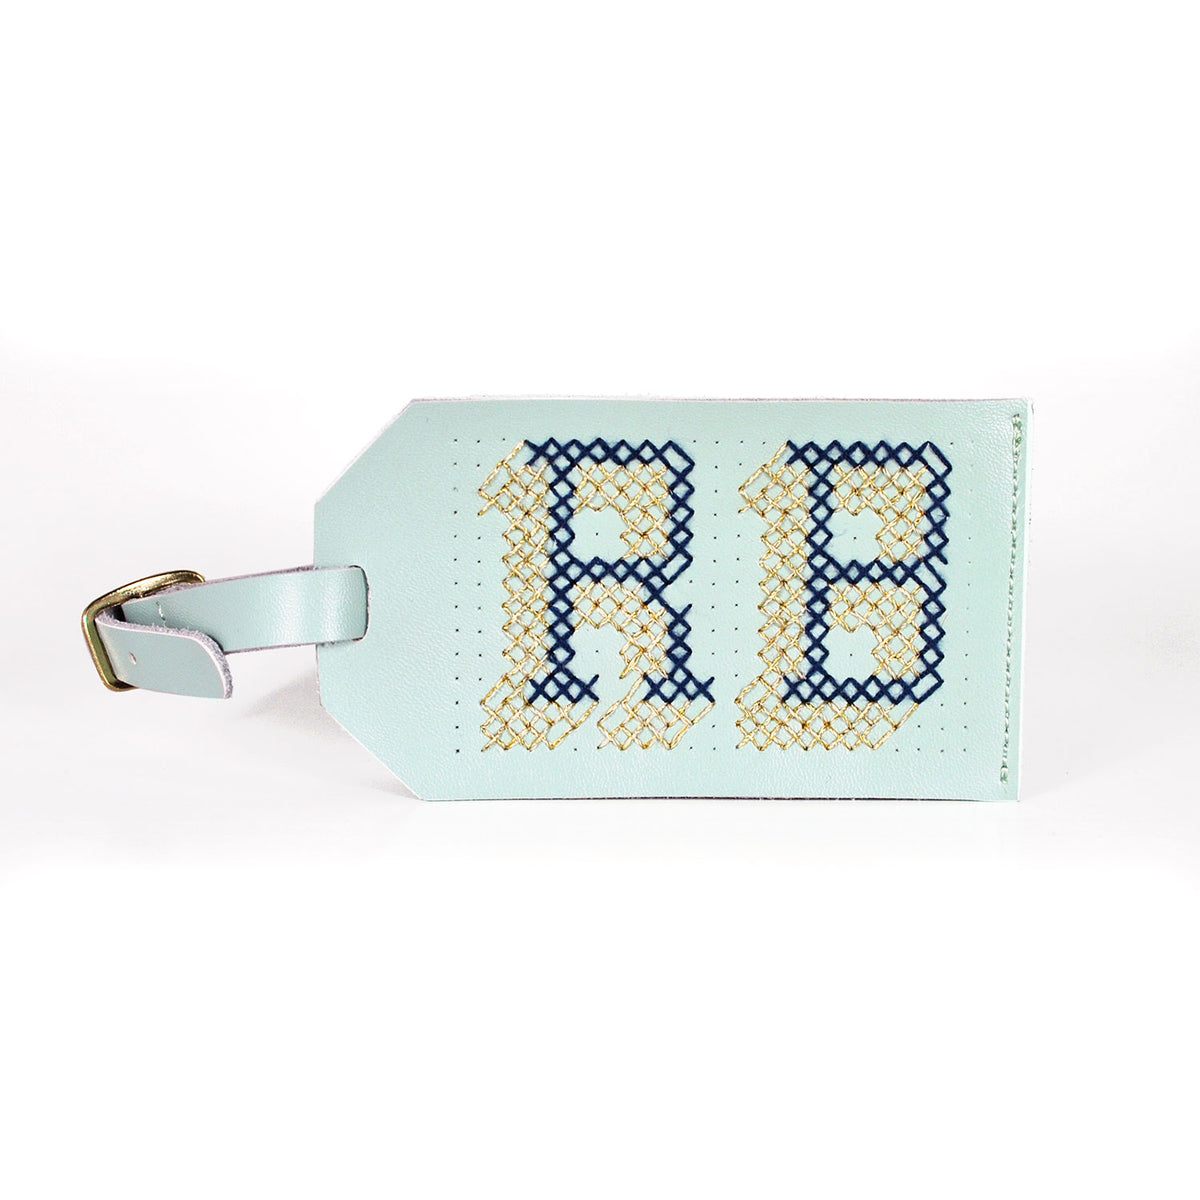 Chasing Threads Cross Stitch Luggage Tag Kit - Mint Leather